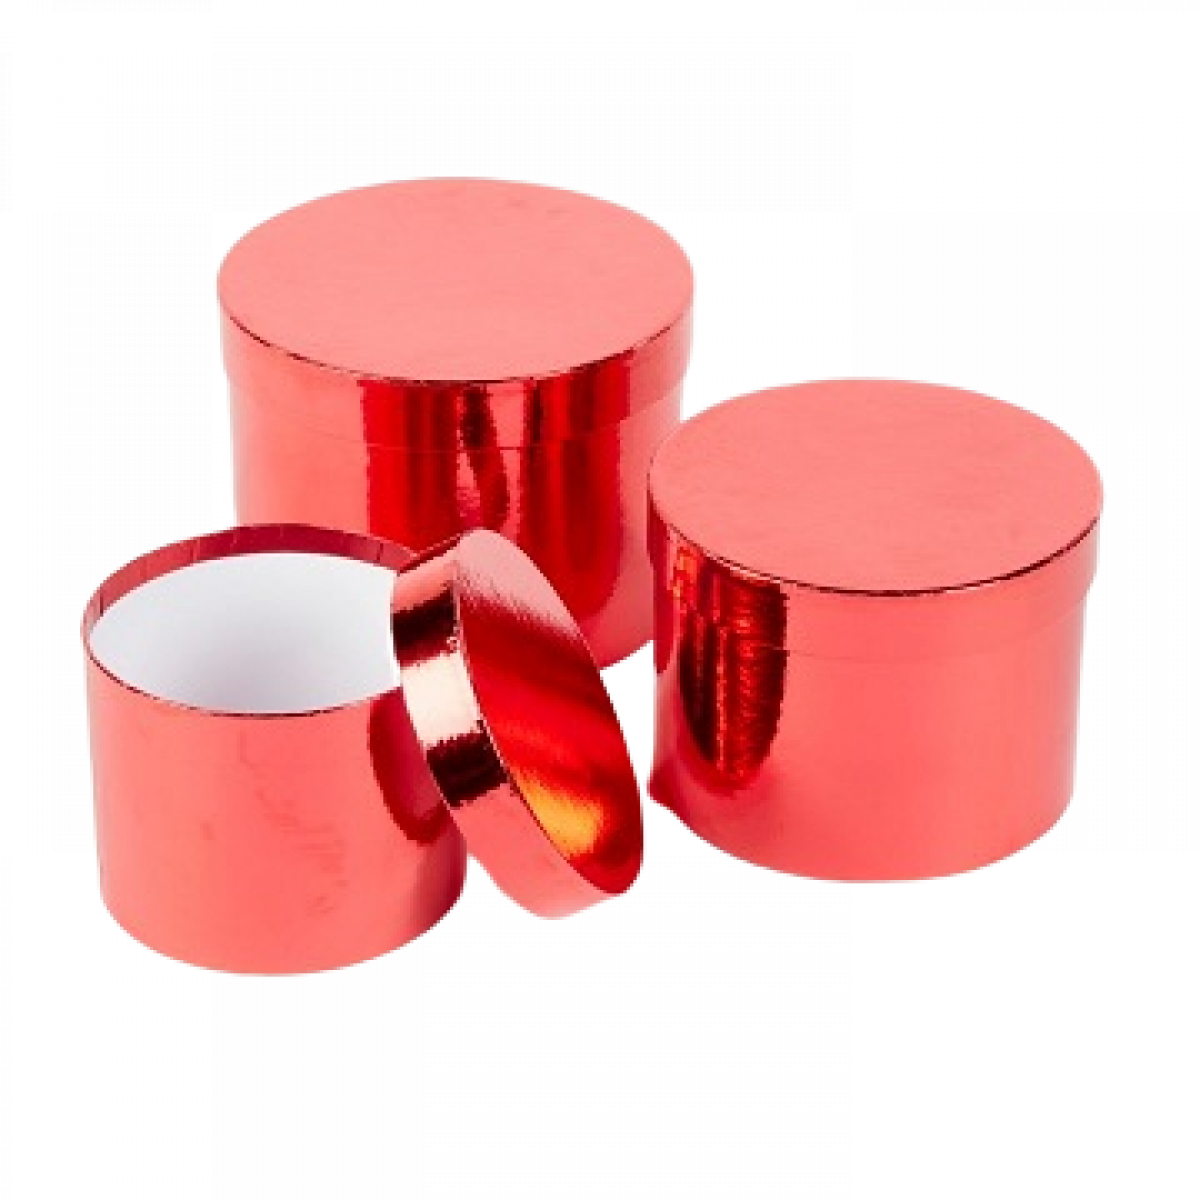 5023 Metallic Red Round Paper Gift Box Lined - Set of 3